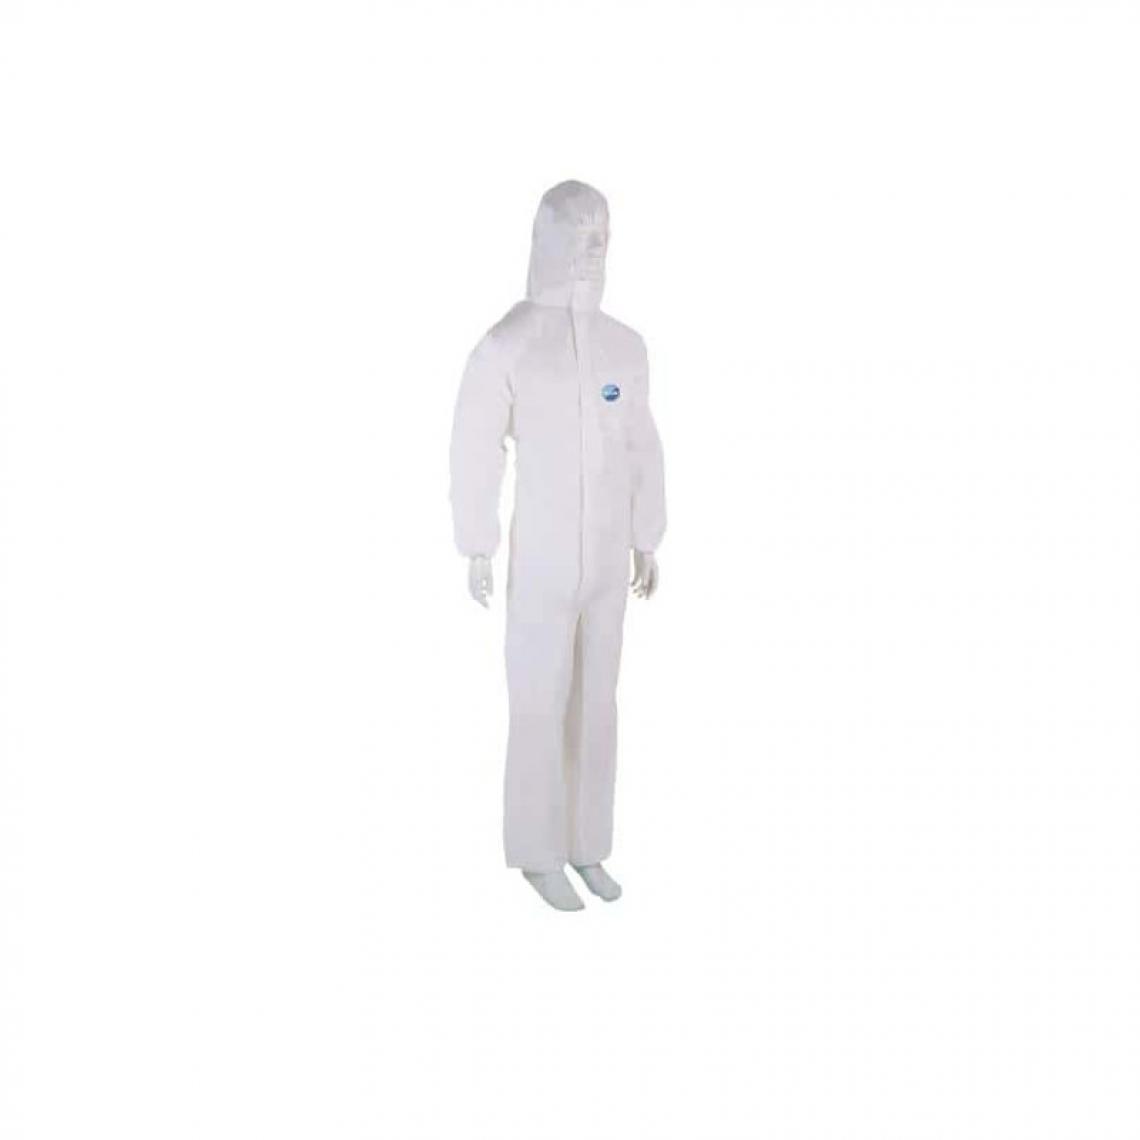 Divers Marques - Combinaison jetable Tyvek Classic Xpert catégorie III taille XXL - Protections corps